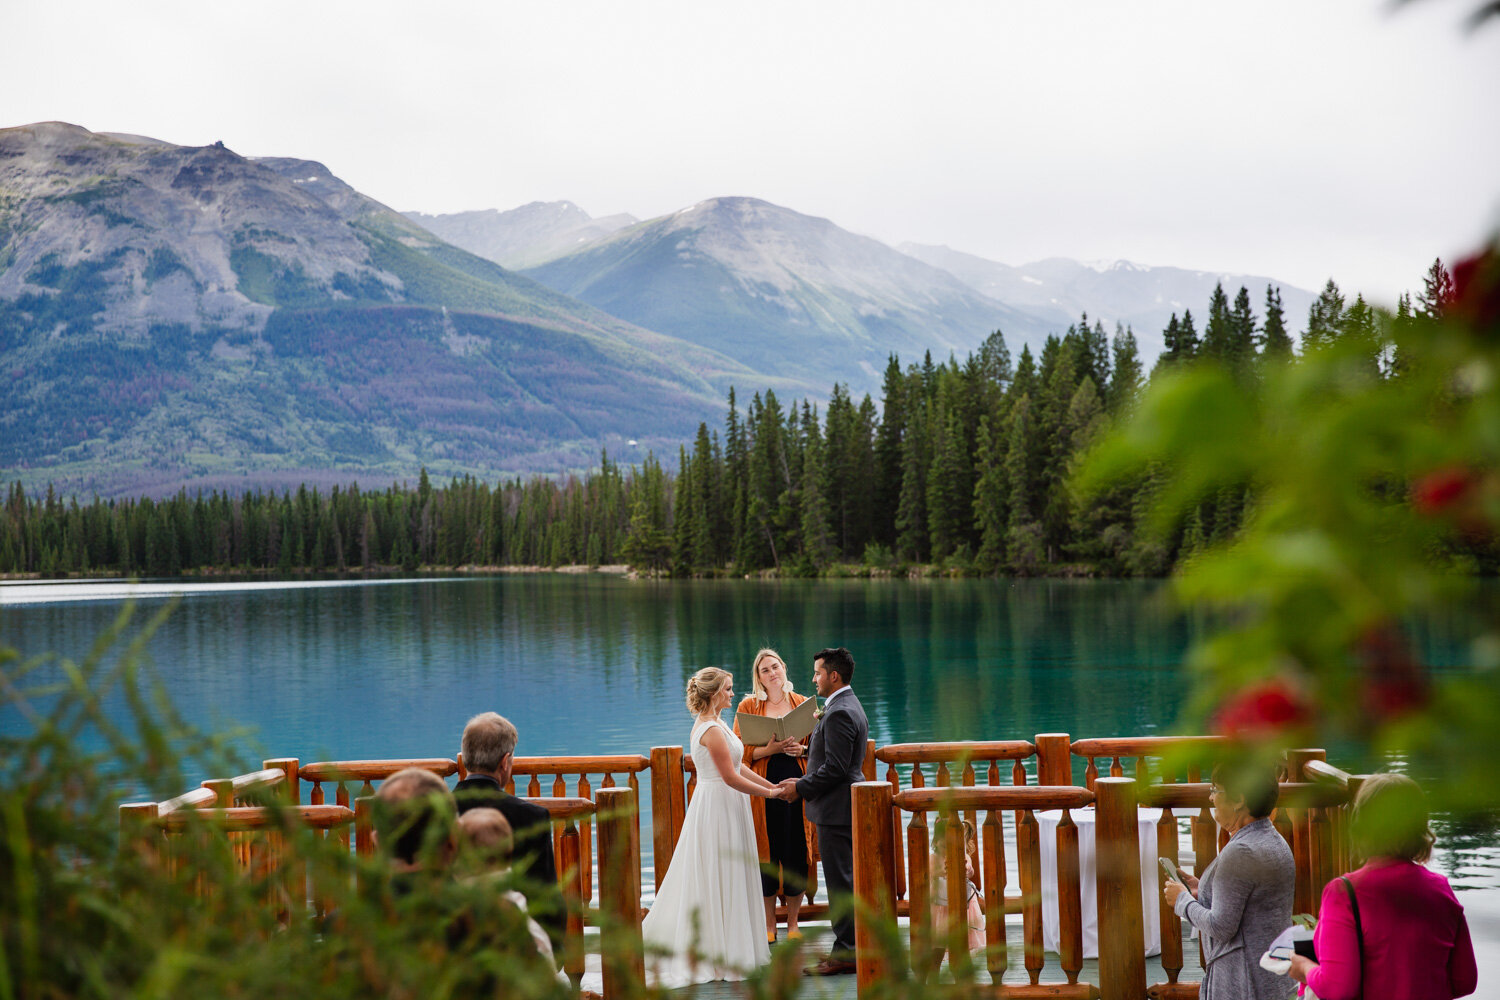 Couple getting married at Jasper Park Lodge | Jamie Robson Photography | Elopement & Wedding Photographer in Jasper (Copy)